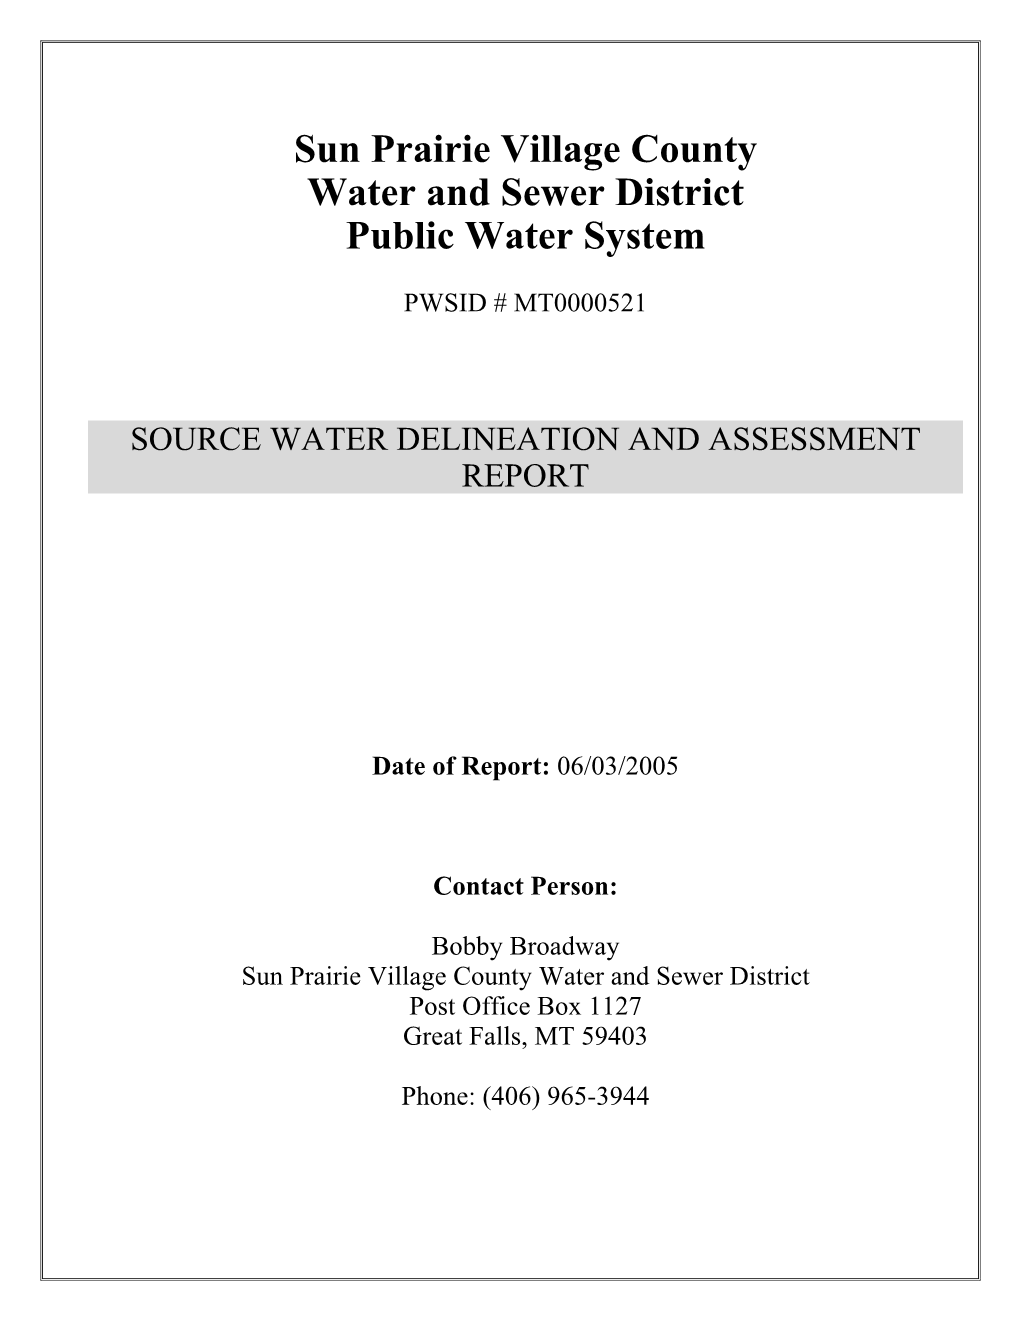 Sun Prairie Village County Source Water Delineation and Assessment